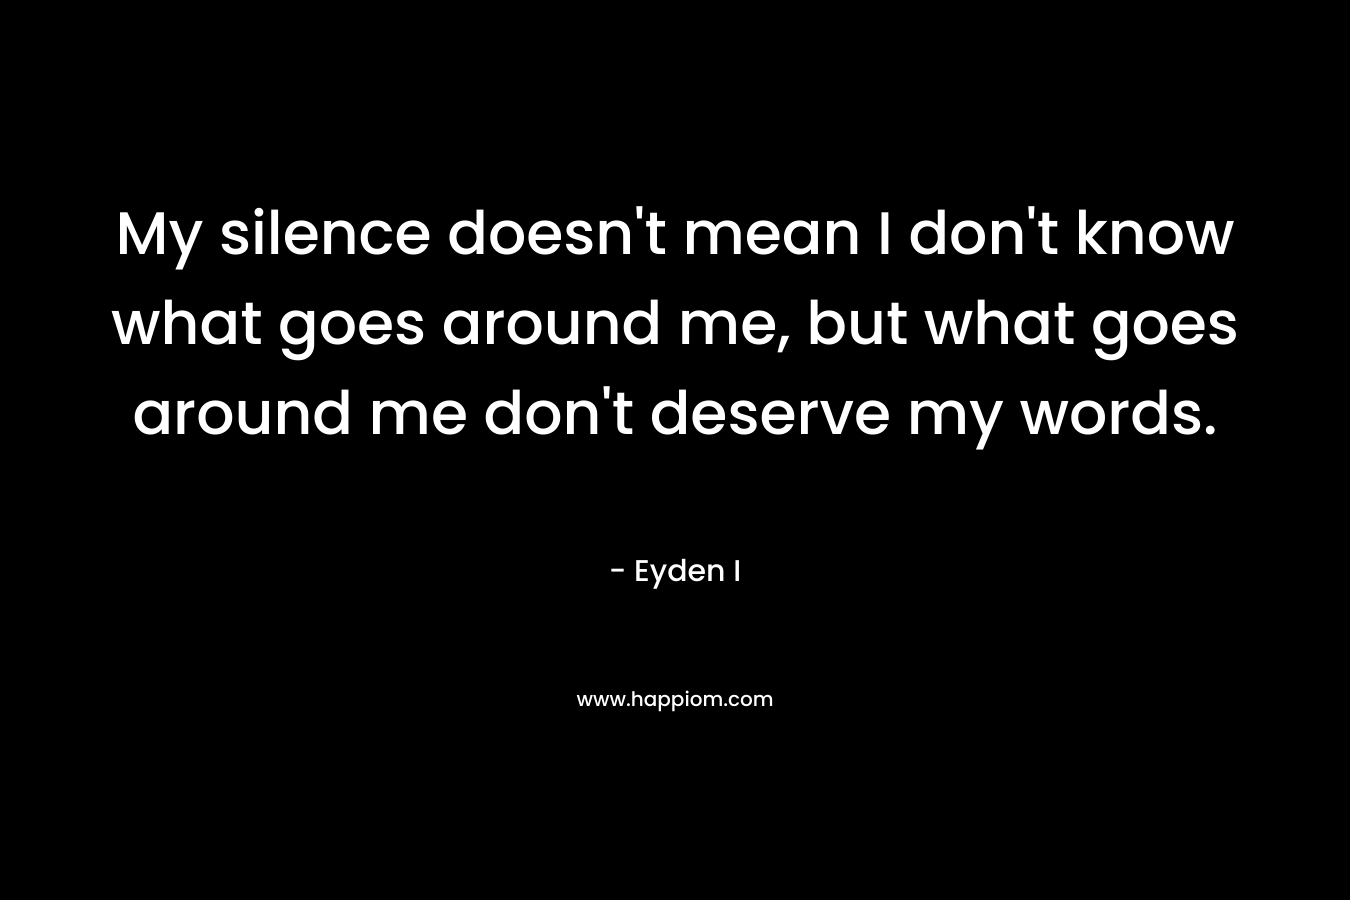 My silence doesn’t mean I don’t know what goes around me, but what goes around me don’t deserve my words. – Eyden I